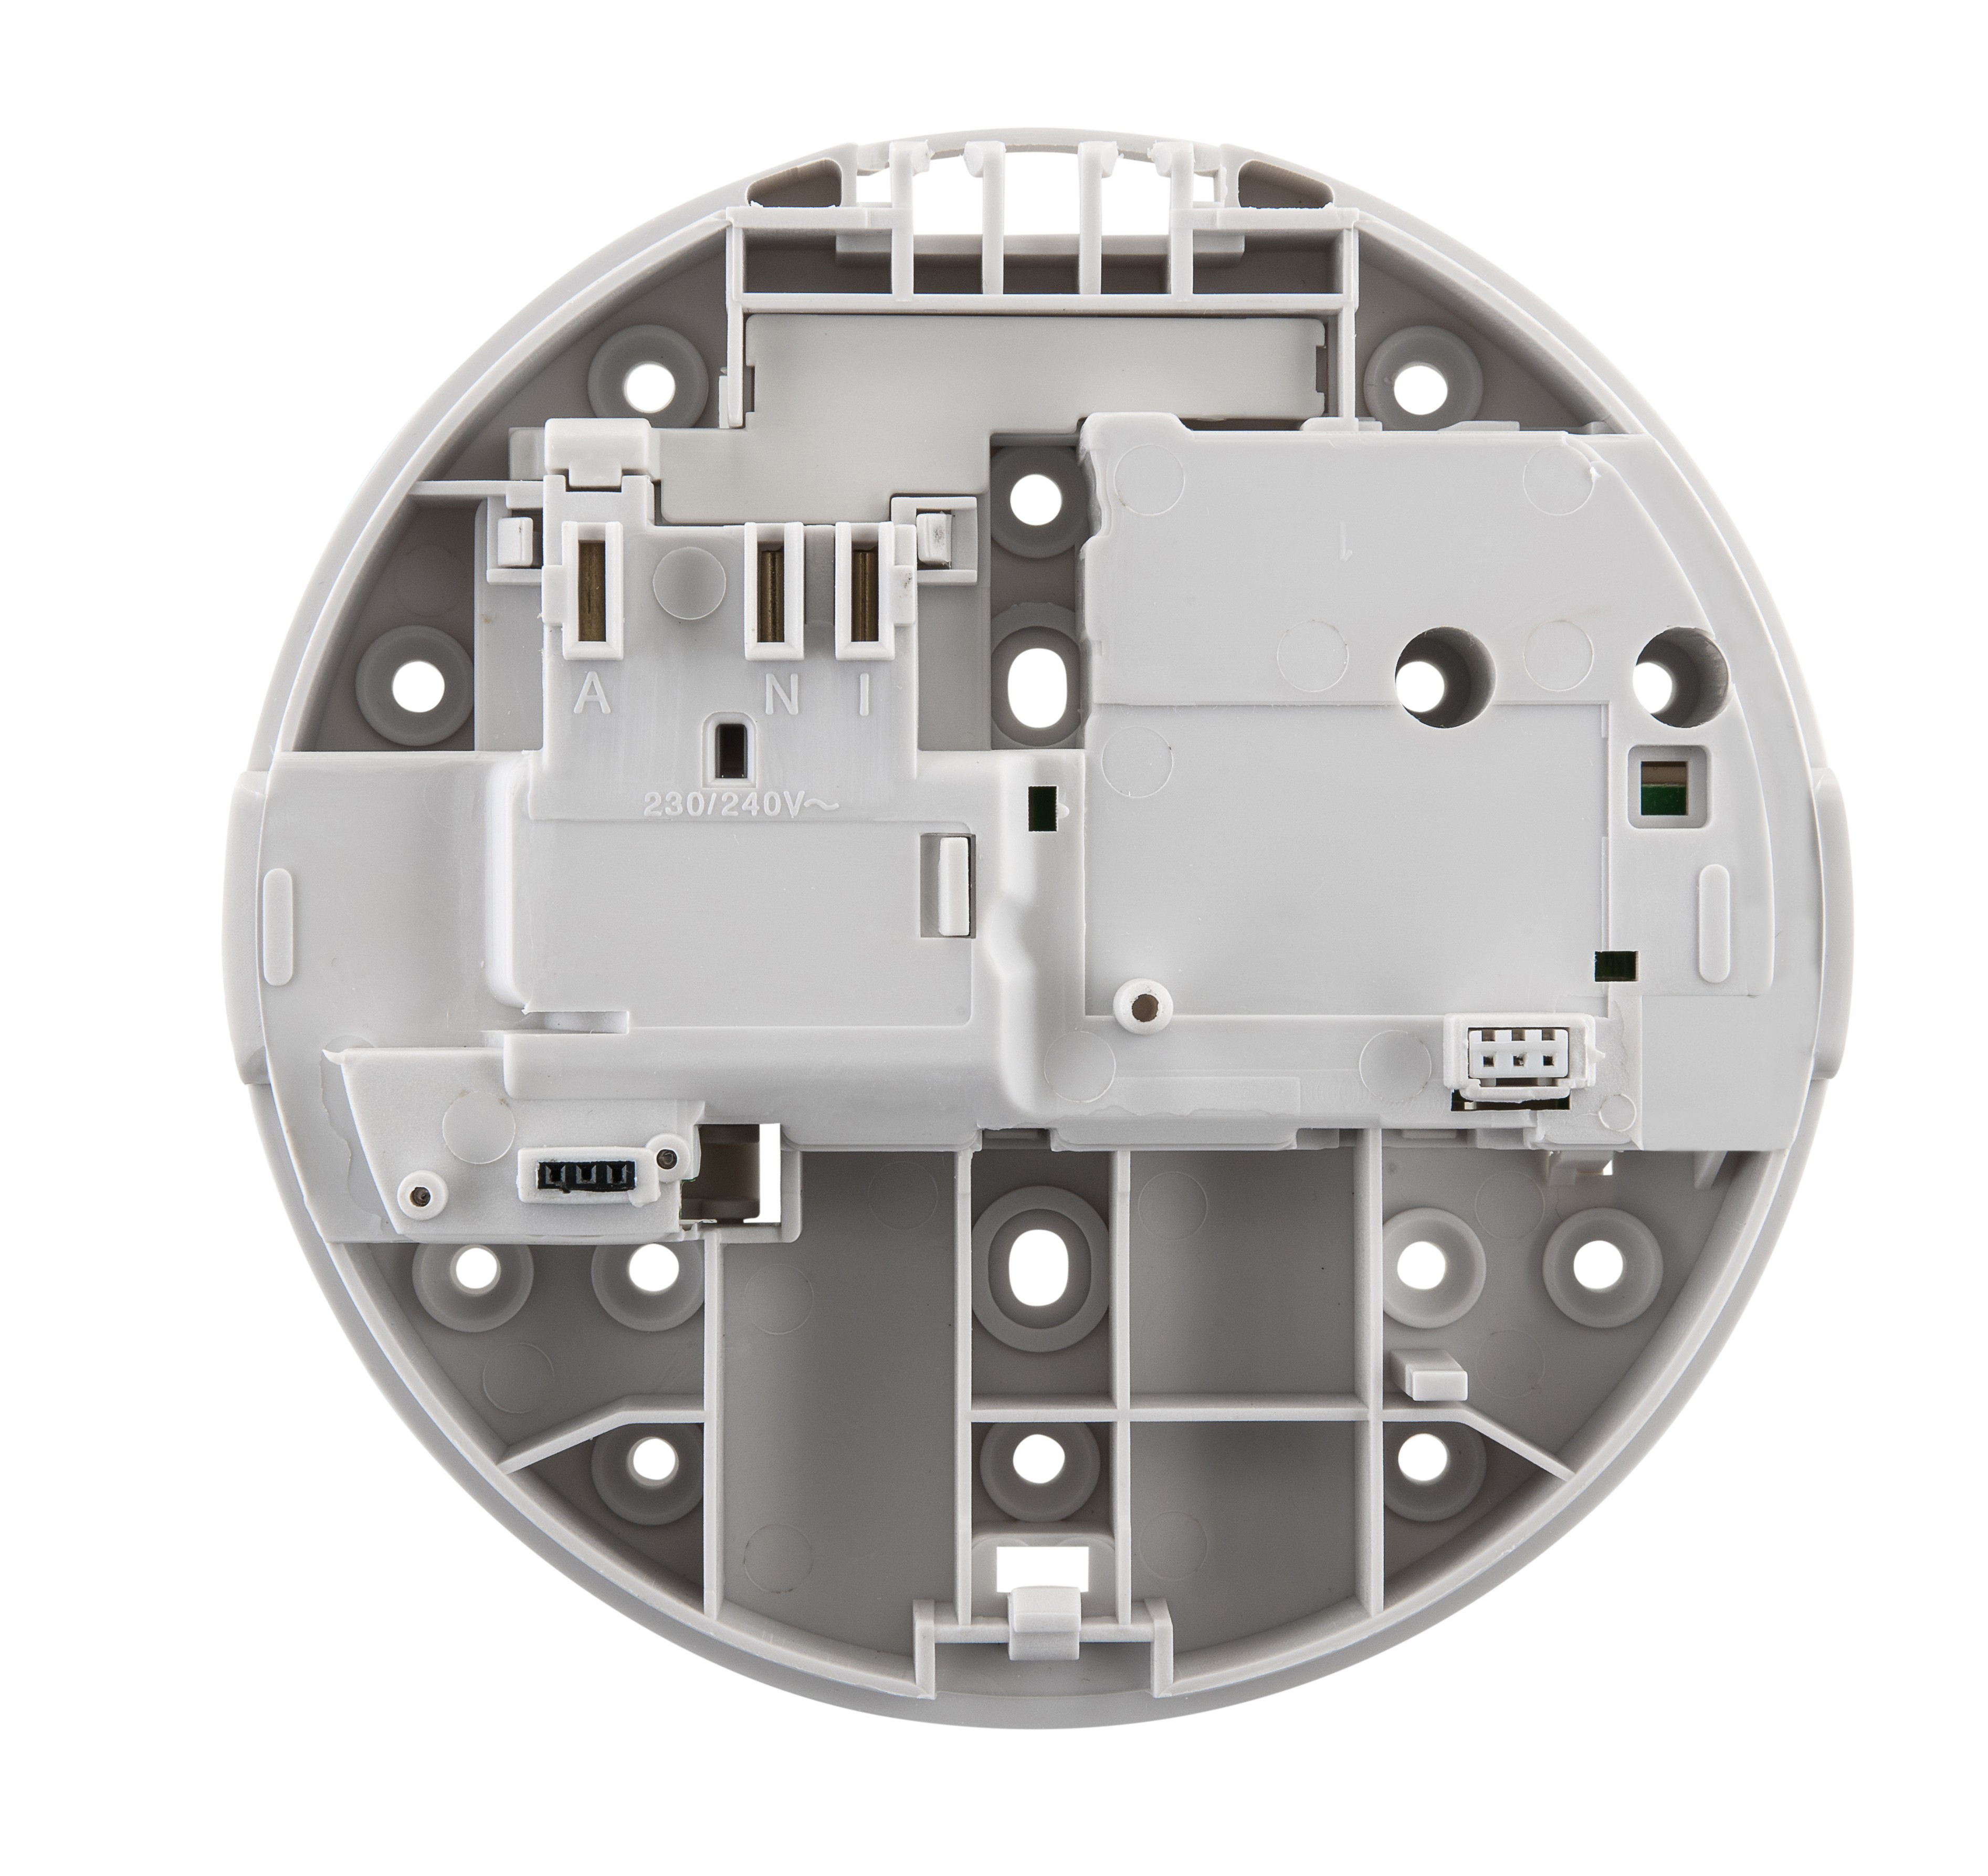 Smoke Alarm Mount Base Integrated, 2A, Relay and Remote Test